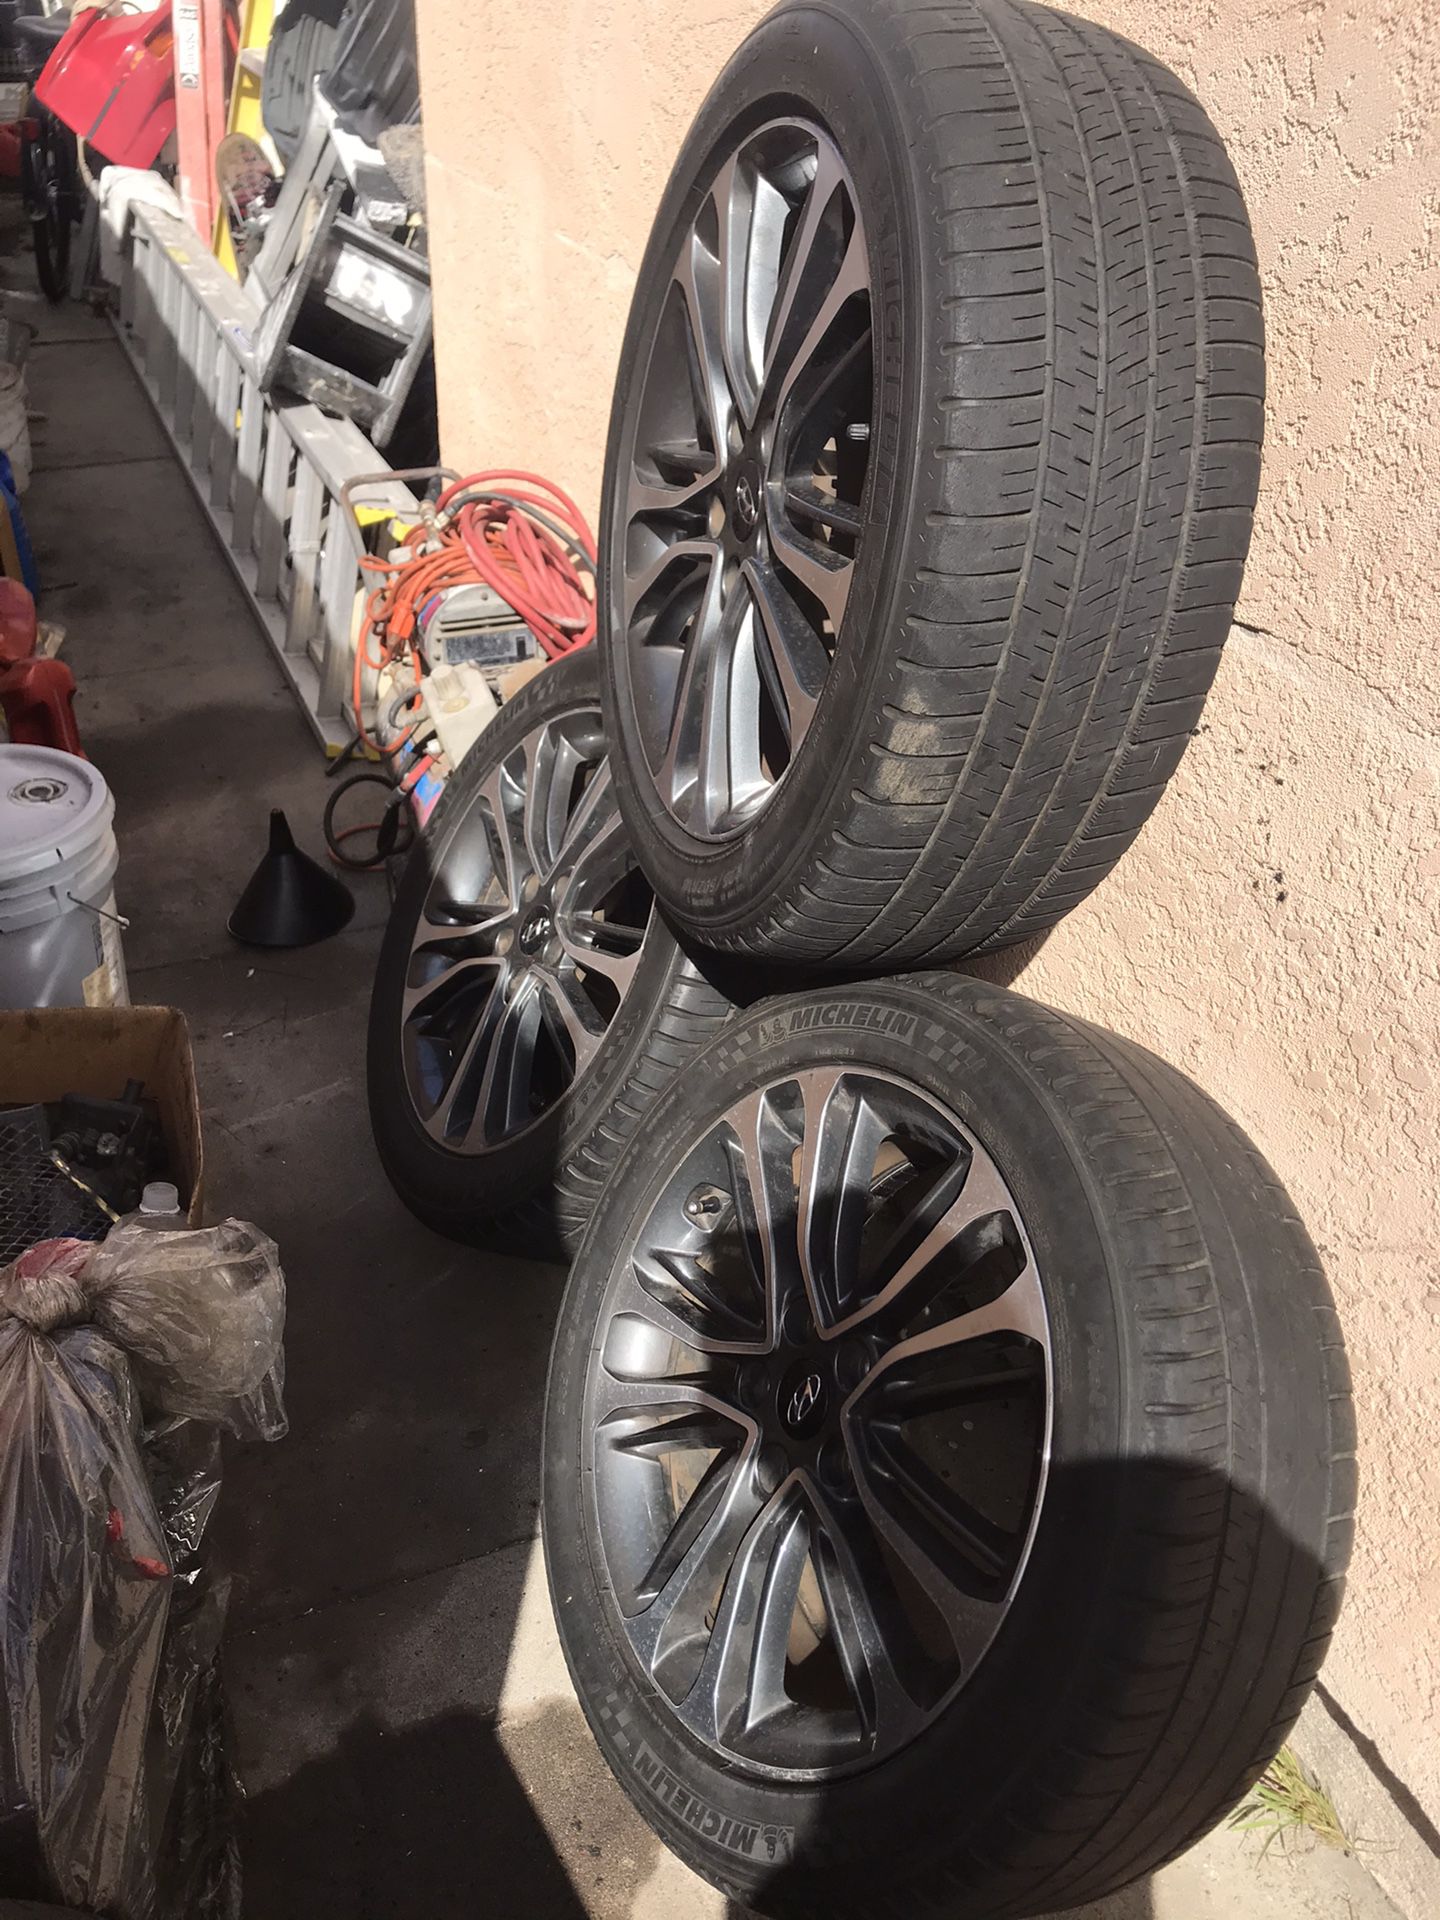 18s 5x114.3 $250 with michellin as3 (225/45/18) on each rim.